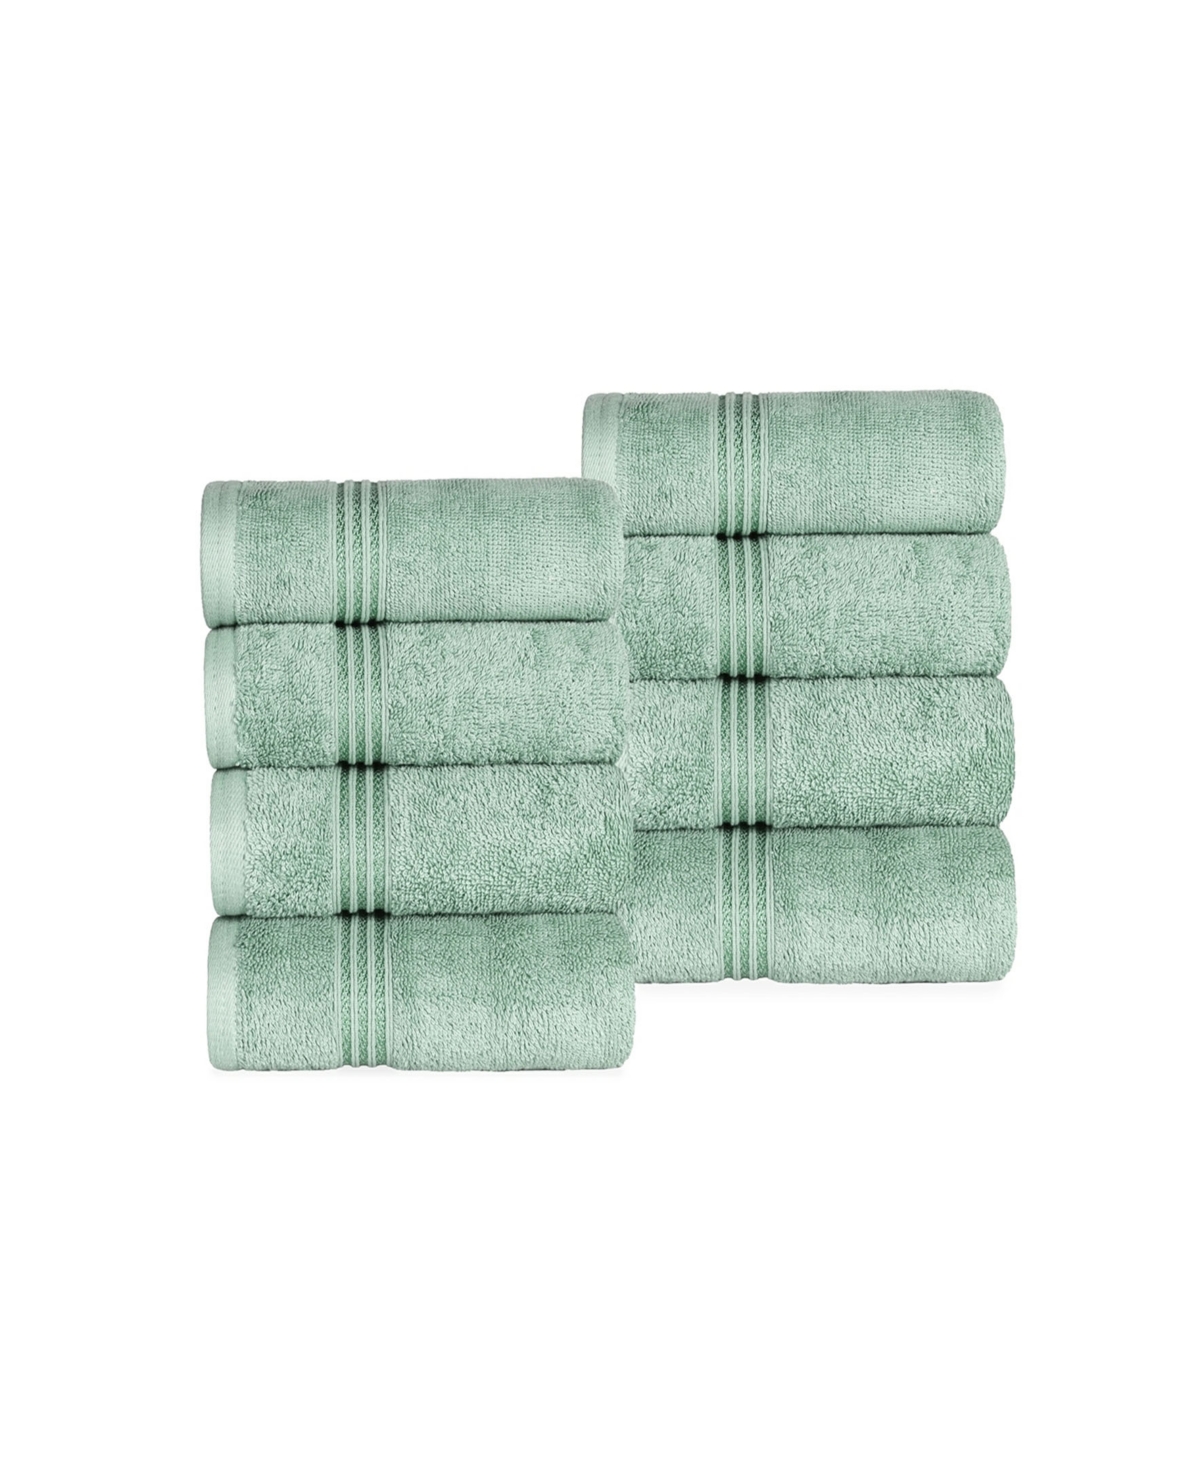 Superior Solid Quick Drying Absorbent 8 Piece Egyptian Cotton Hand Towel Set Bedding In Sage